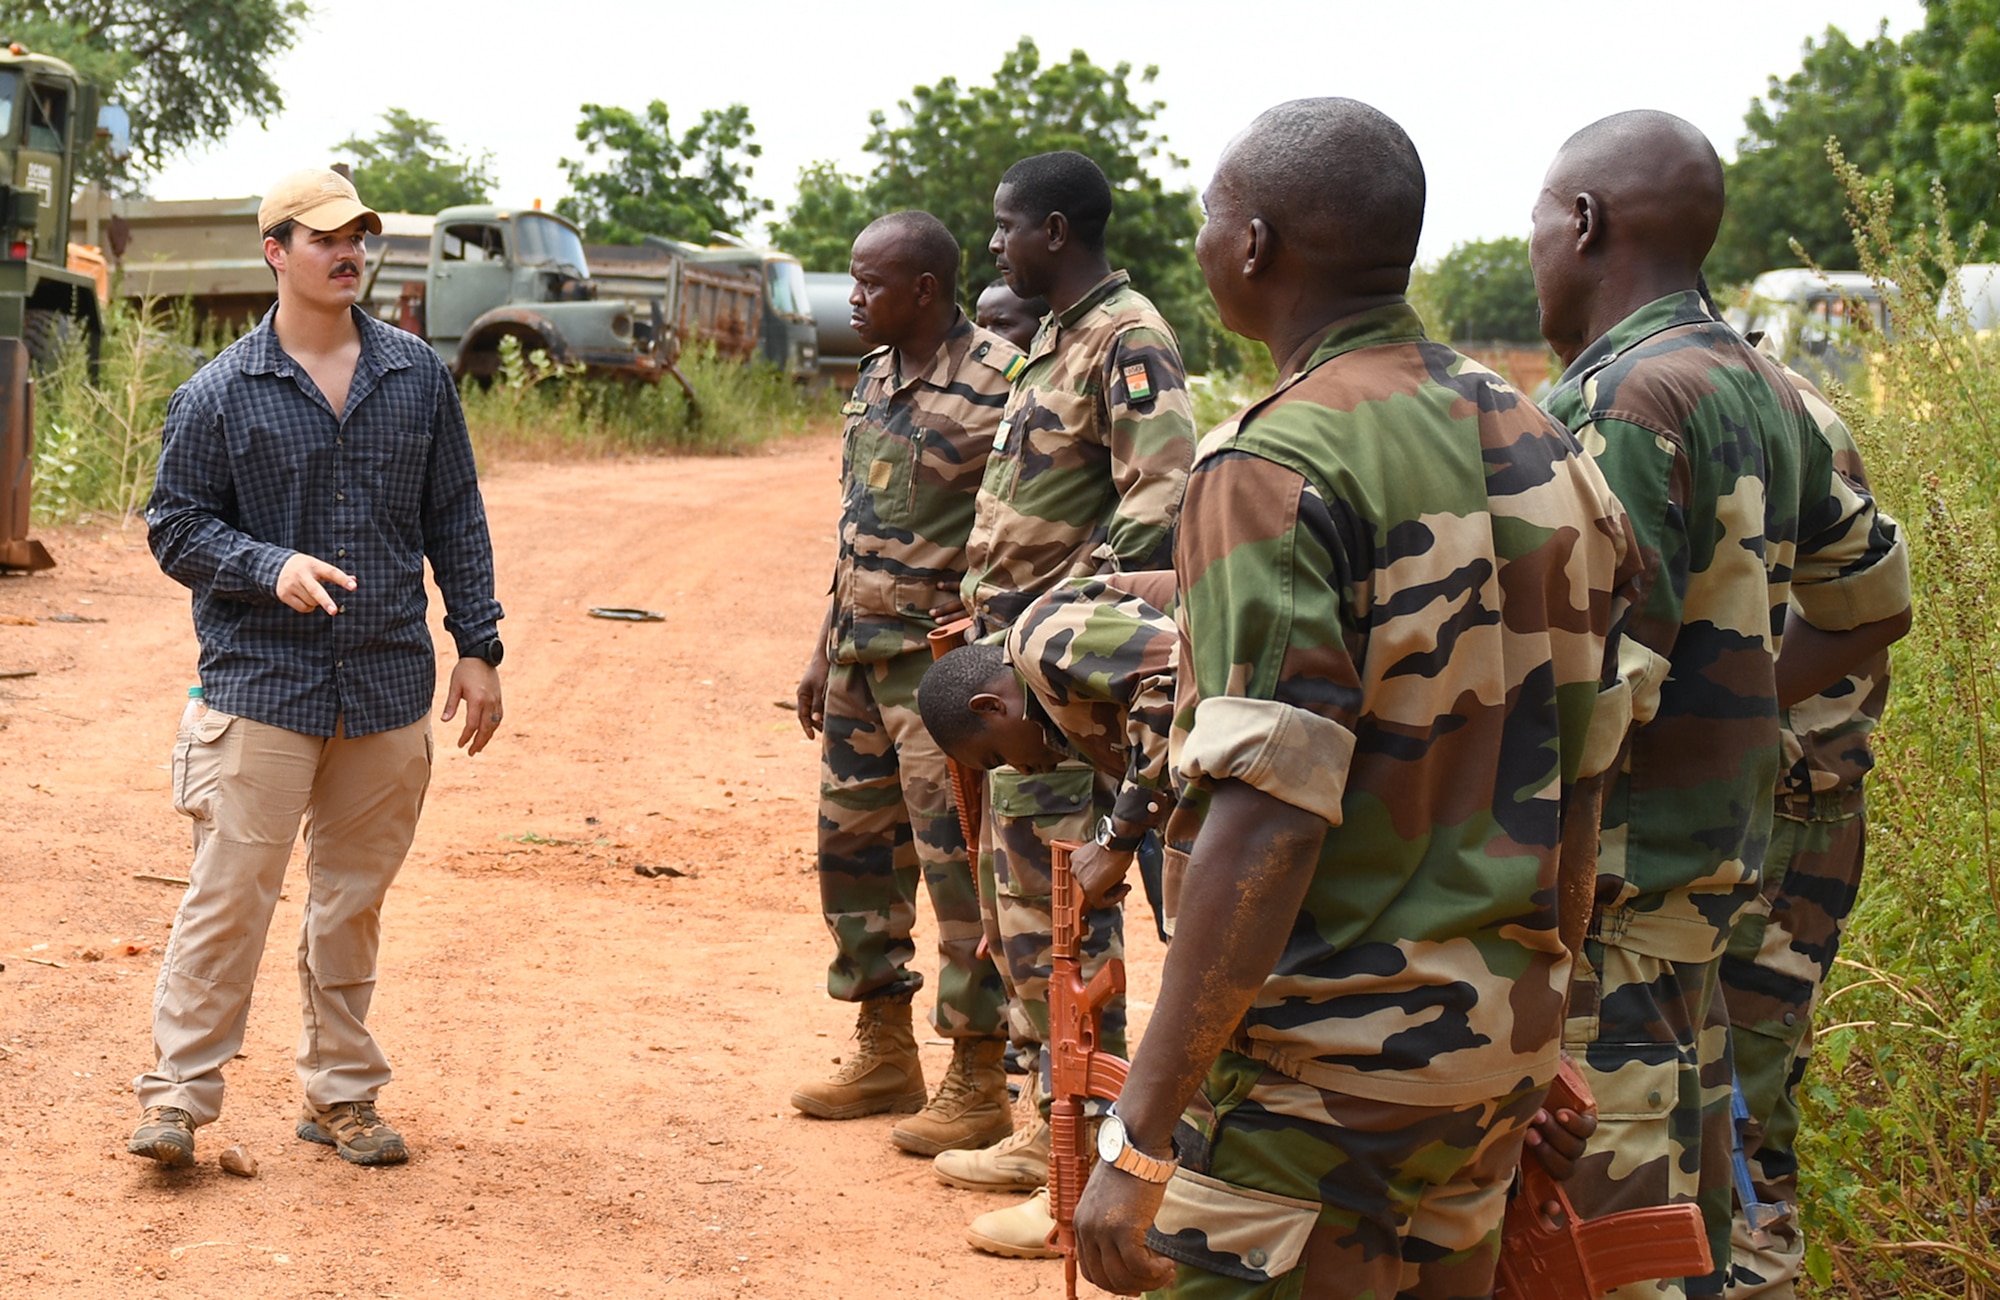 U.S. Air Force Senior Airman Caleb Love, 768th Expeditionary Air Base Squadron Explosive Ordnance Disposal team member, teaches members of the Forces Armées Nigeriennes (Nigerien Armed Forces) Genie Unit how to locate an improvised explosive device during an IED Awareness Course in Niamey, Niger, Oct. 11, 2019. During this week-long course, the FAN learned how to locate and react to an IED, how set up a cordon and the procedures to clear the area. (U.S. Air Force photo by Staff Sgt. Alex Fox Echols III)